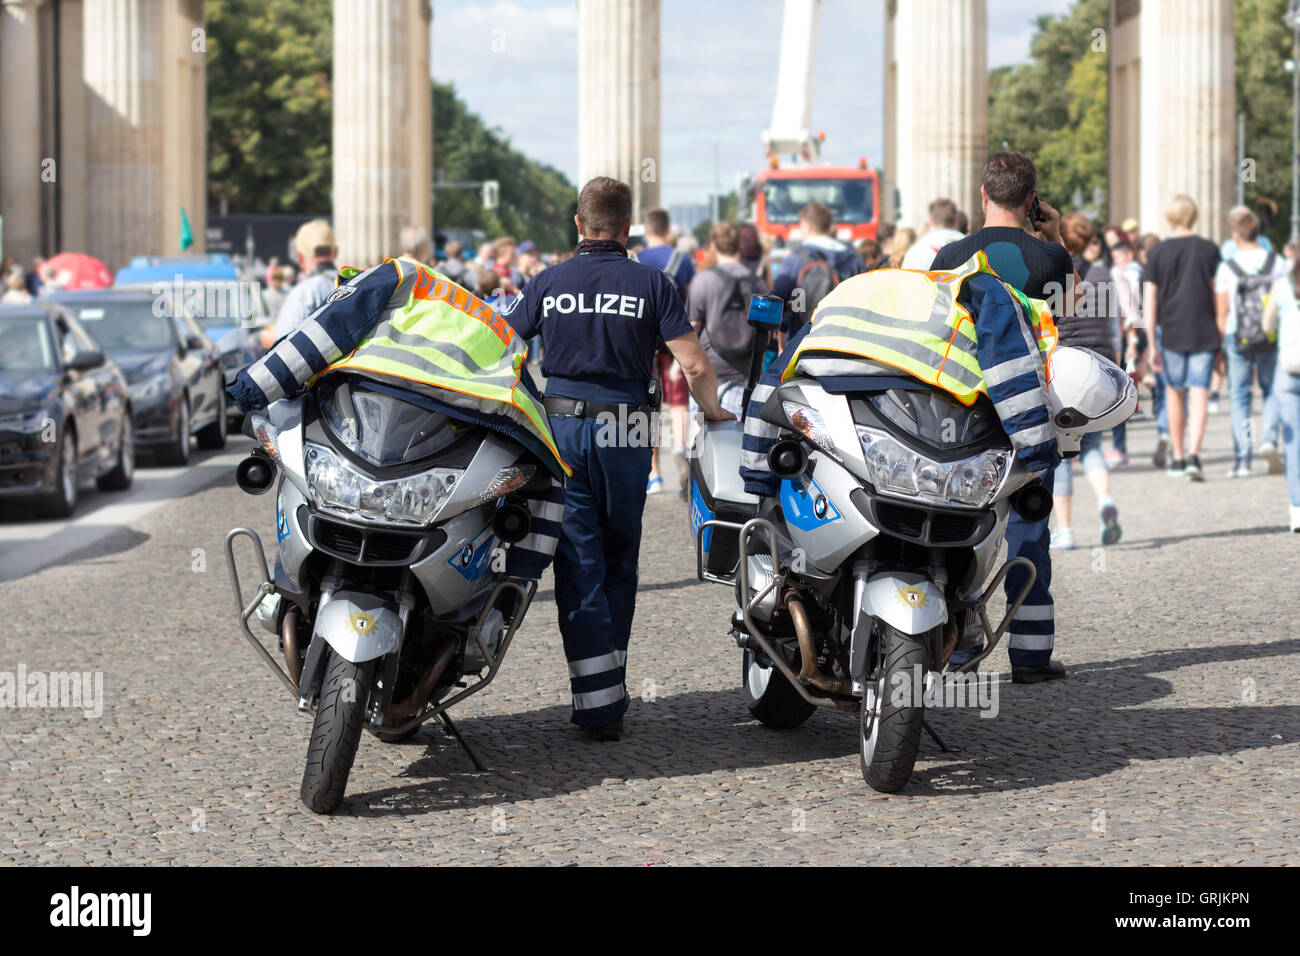 Policeman officer standing next to police motorbikes at Pariser Platz in Berlin, Germany. Stock Photo